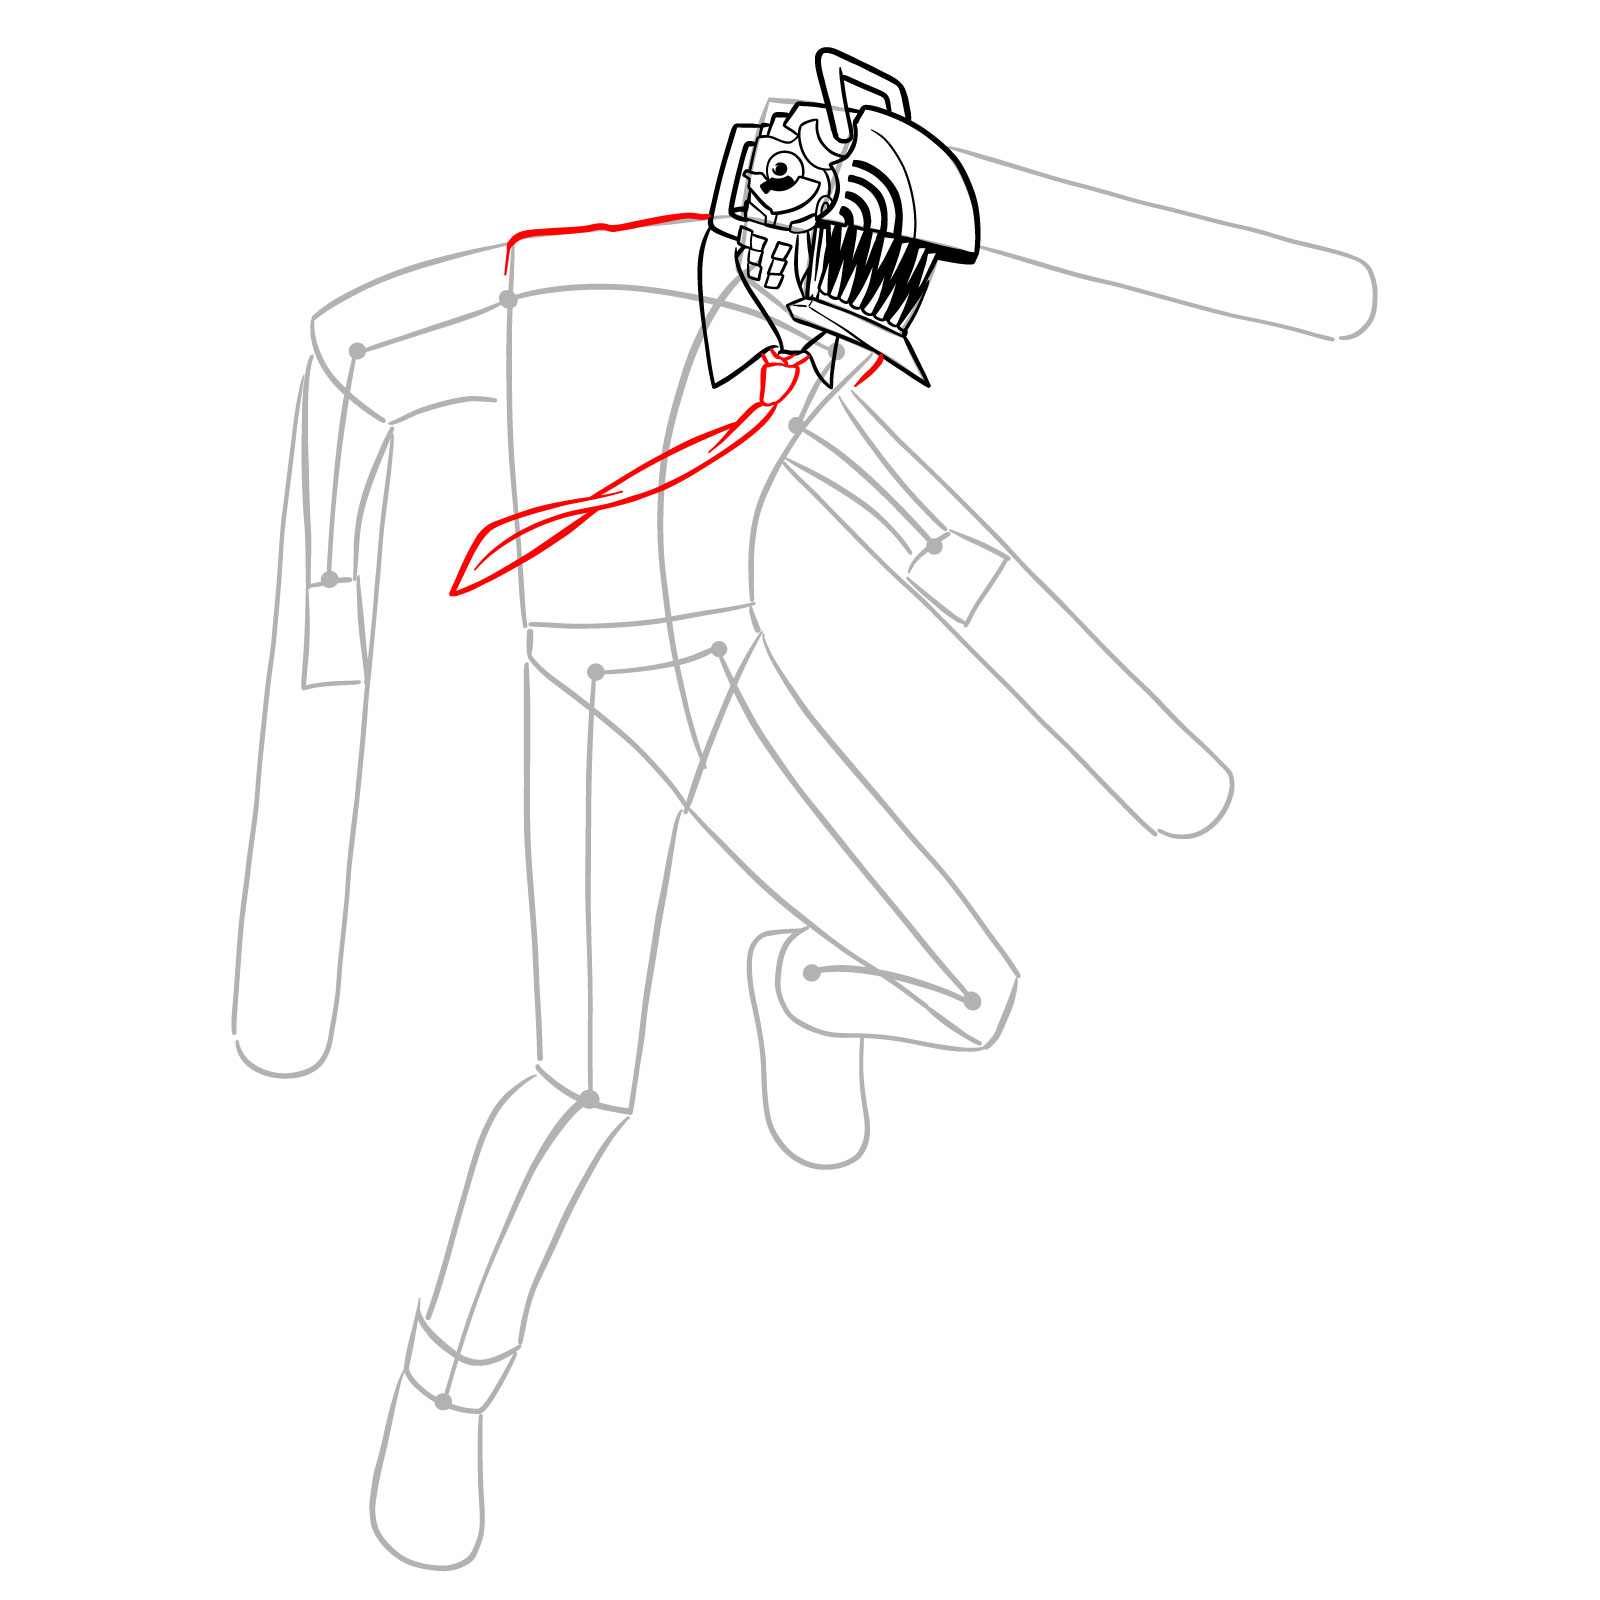 Illustration of Chainsaw Man's shoulders and tie details - step 12